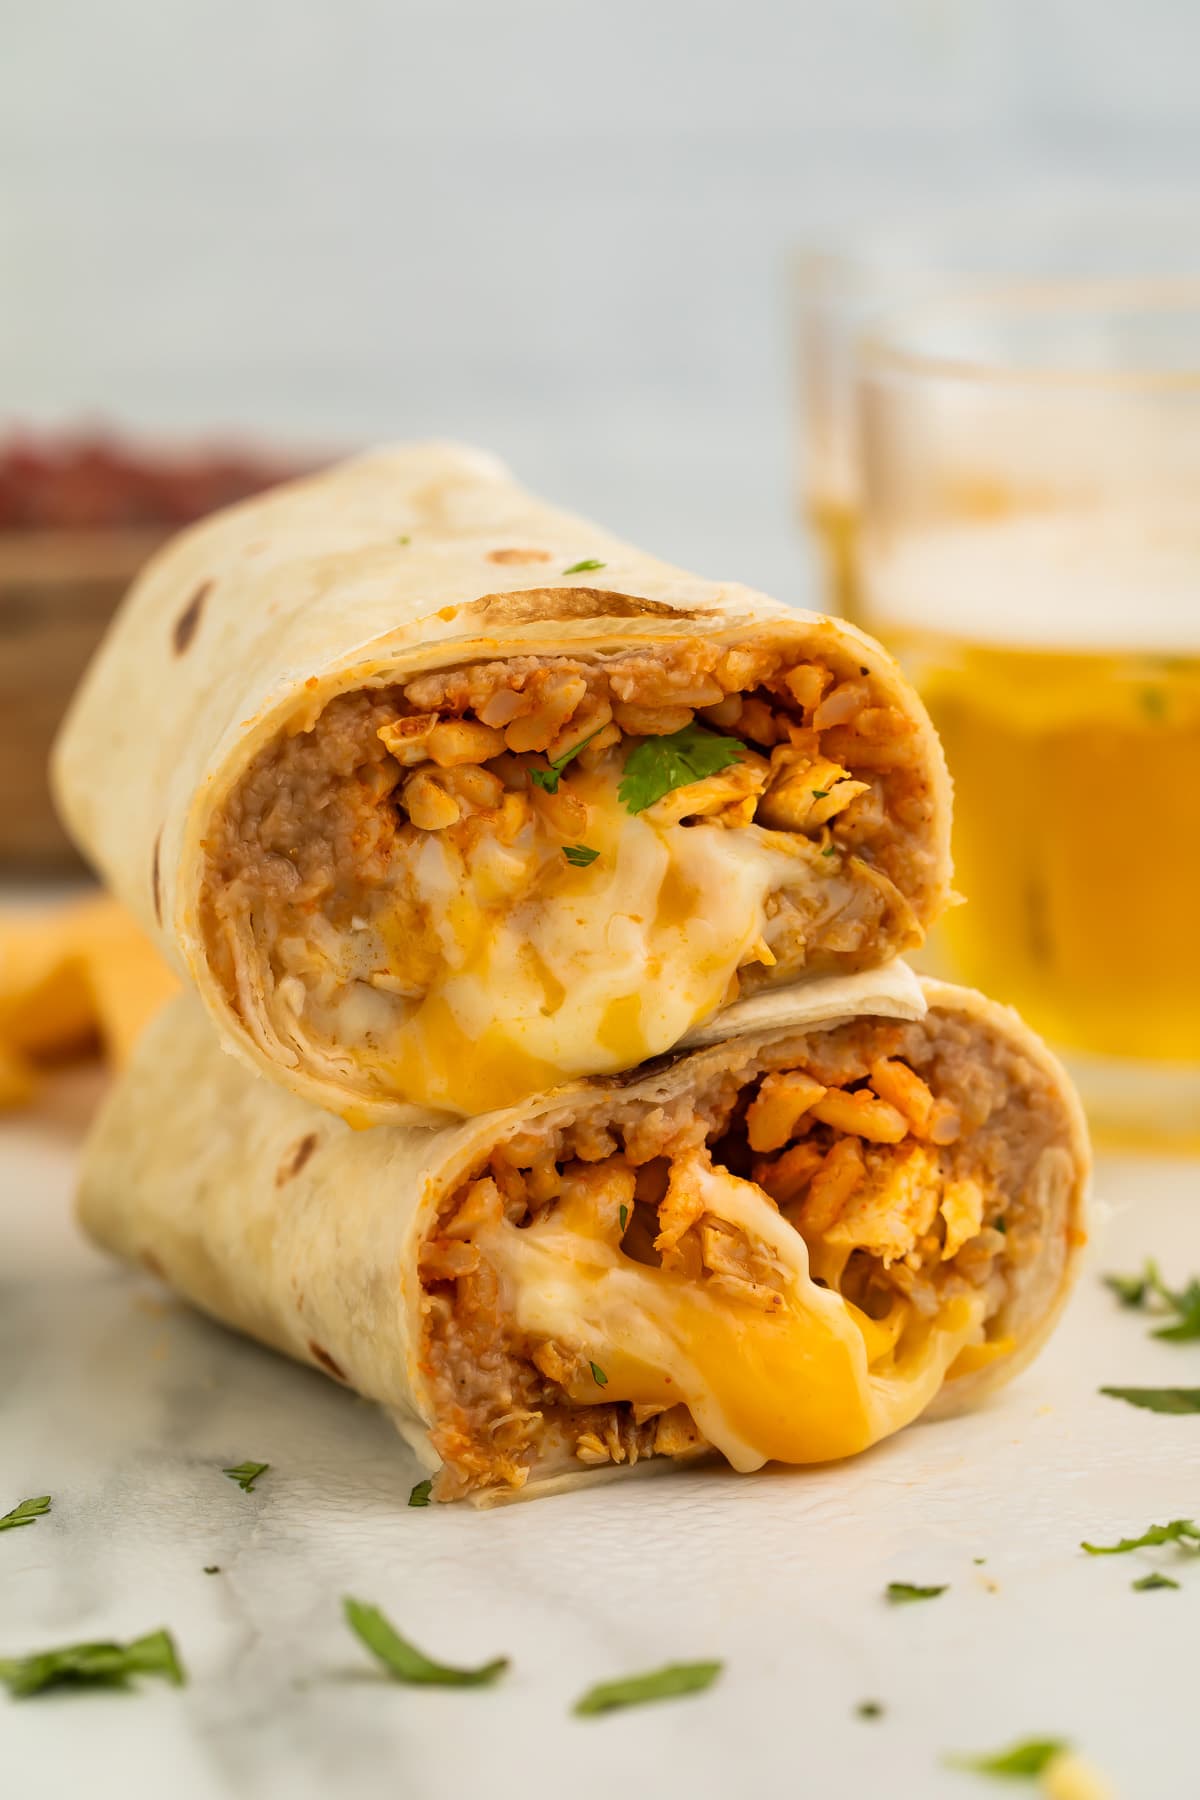 Two halves of a chicken burrito stacked on top of each other, showing a filling of chicken, rice, beans, and gooey cheese.